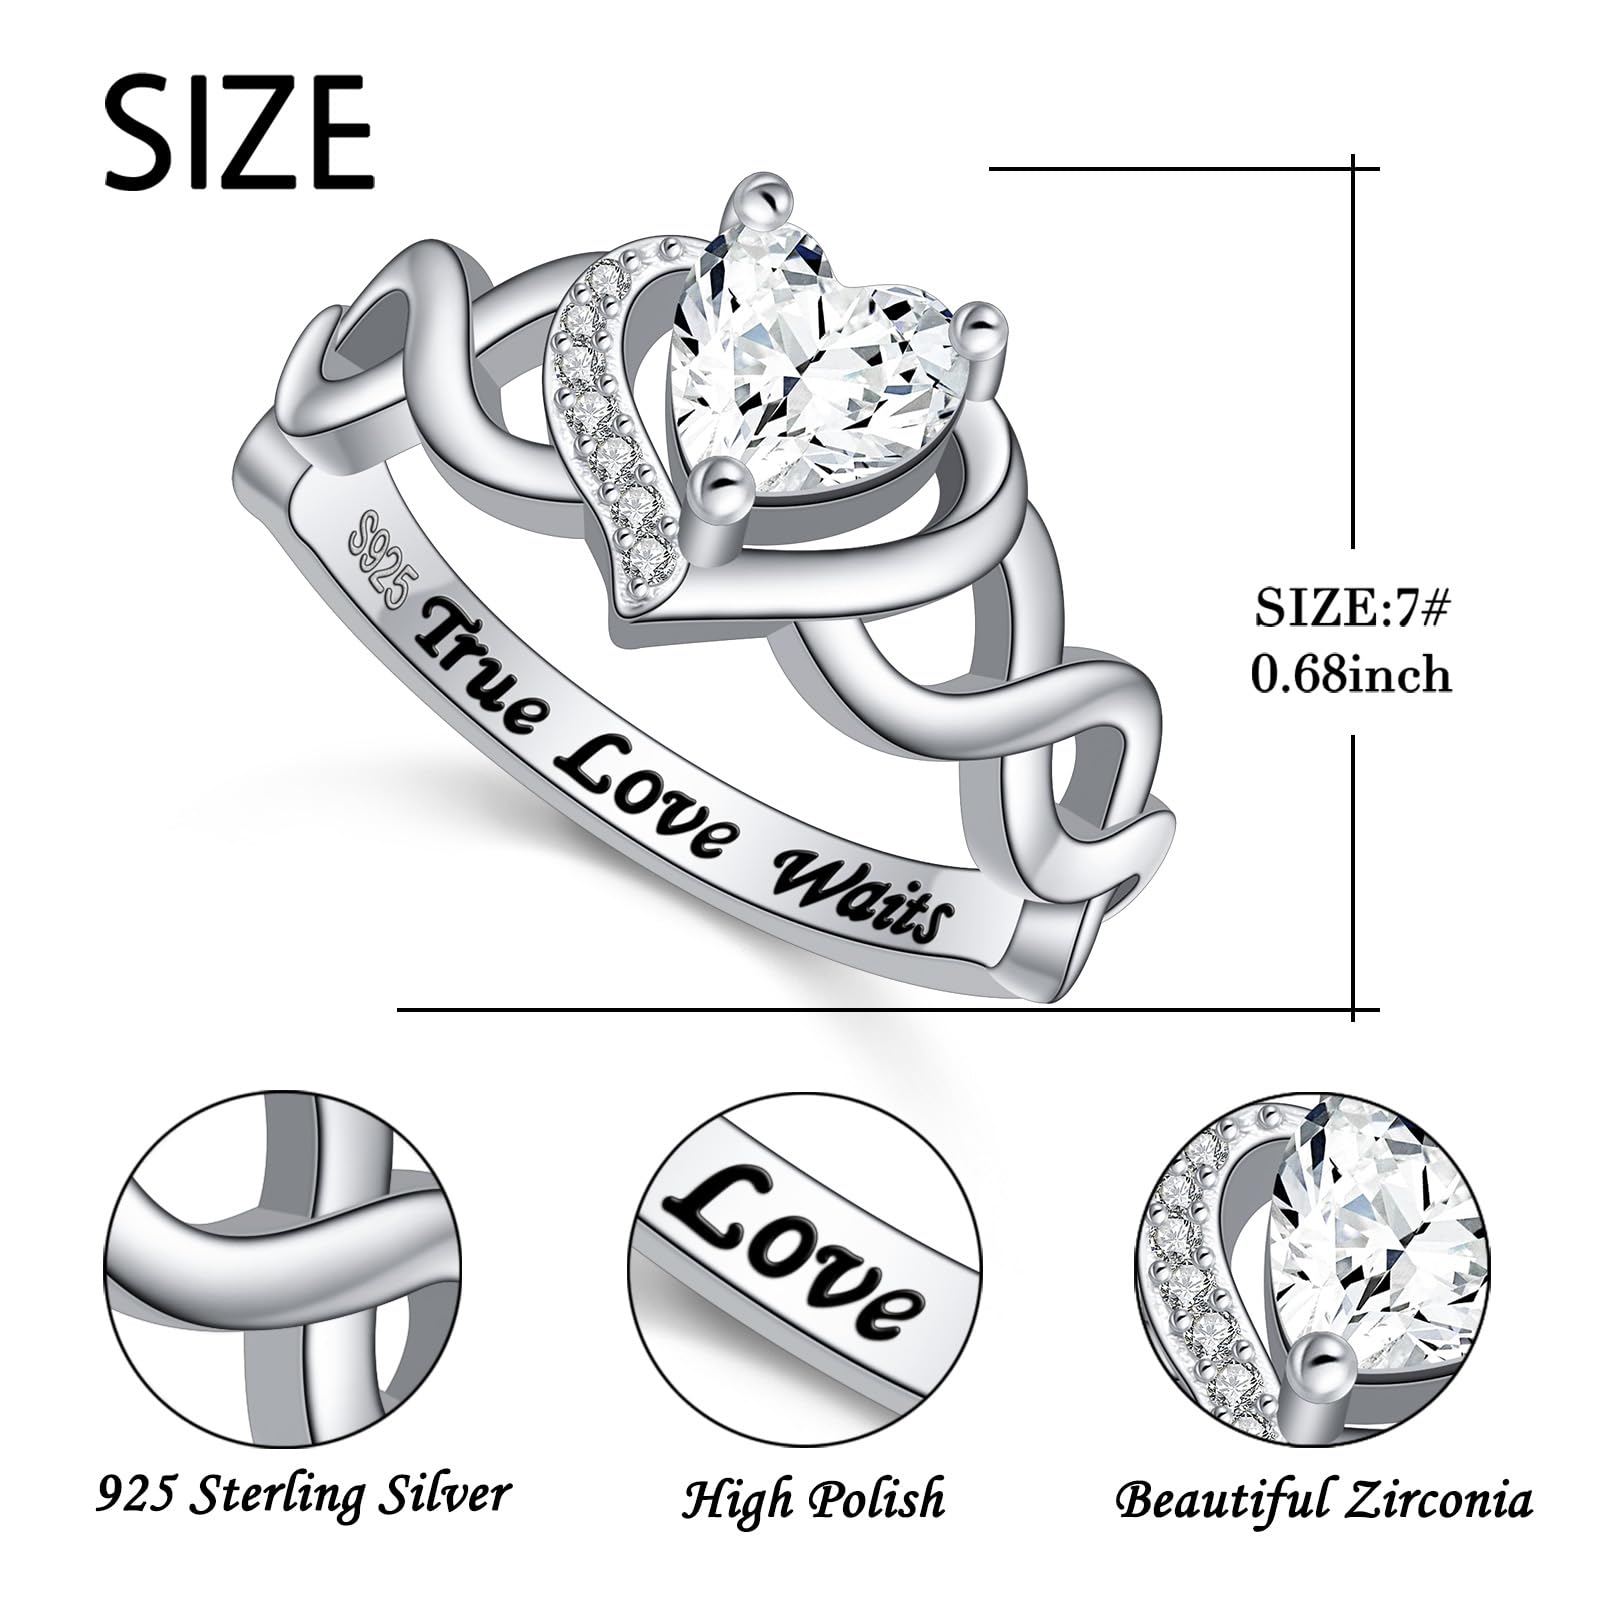 HOOHWE S925 Sterling Silver True Love Waits Ring for Women Heart Engagement Love Knot Ring Promise Ring Wedding Ring for Women Girlfriend Wife Size 7